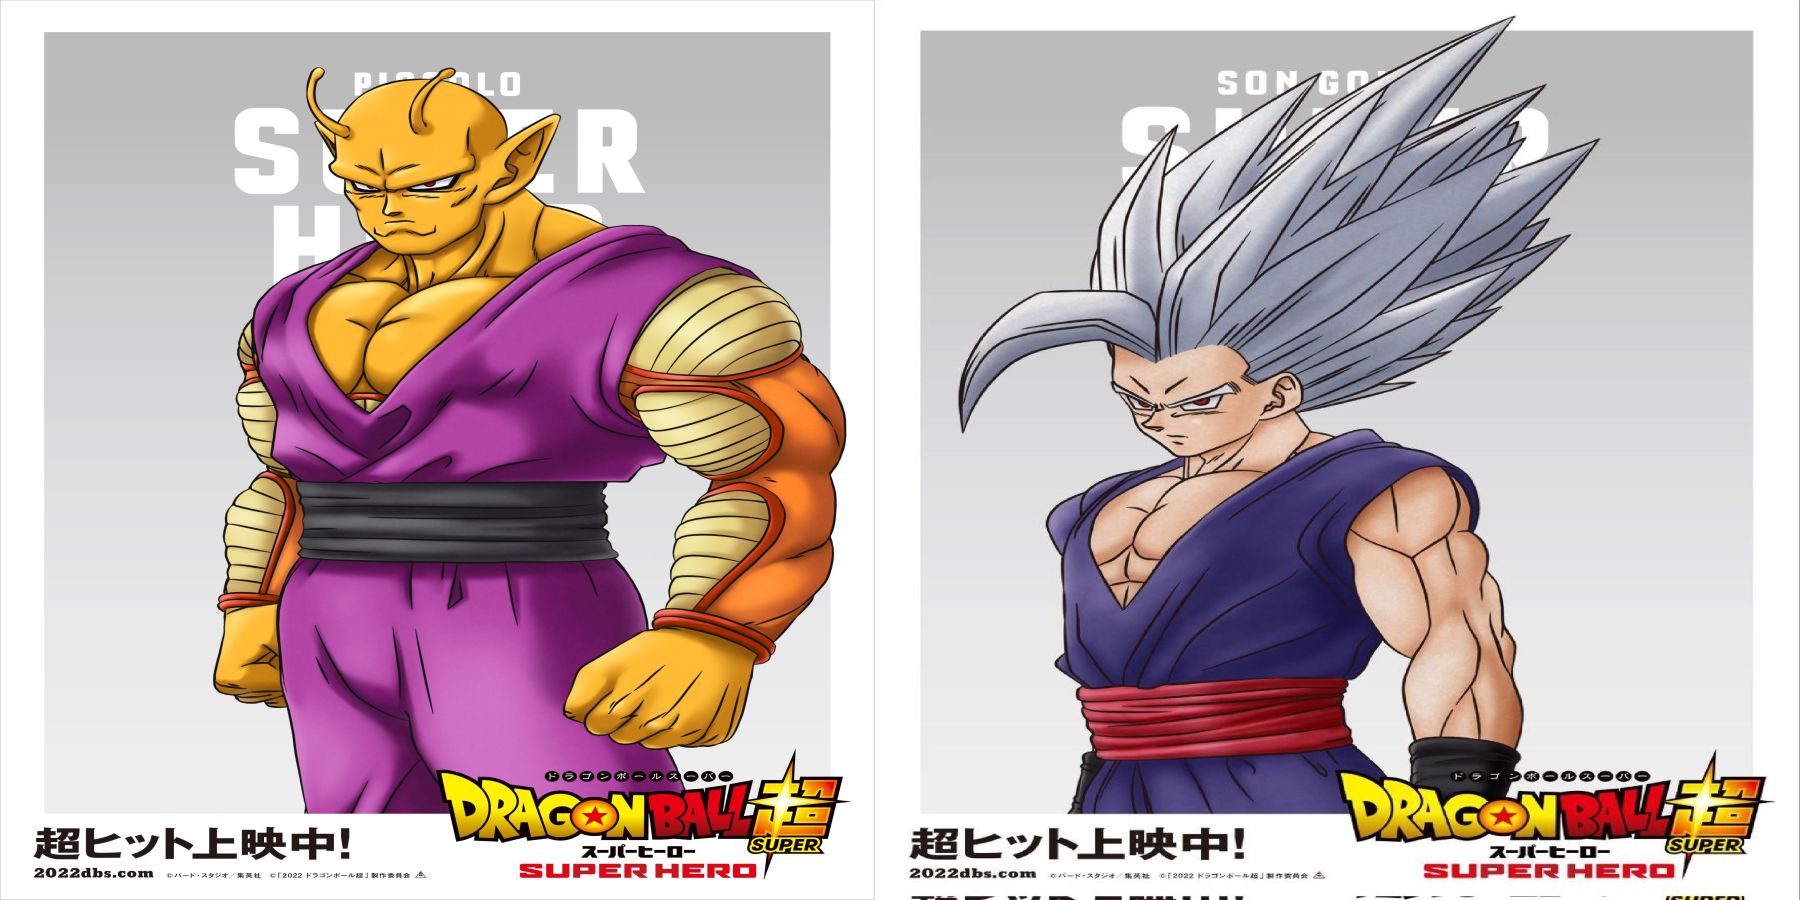 Piccolo and gohans new forms